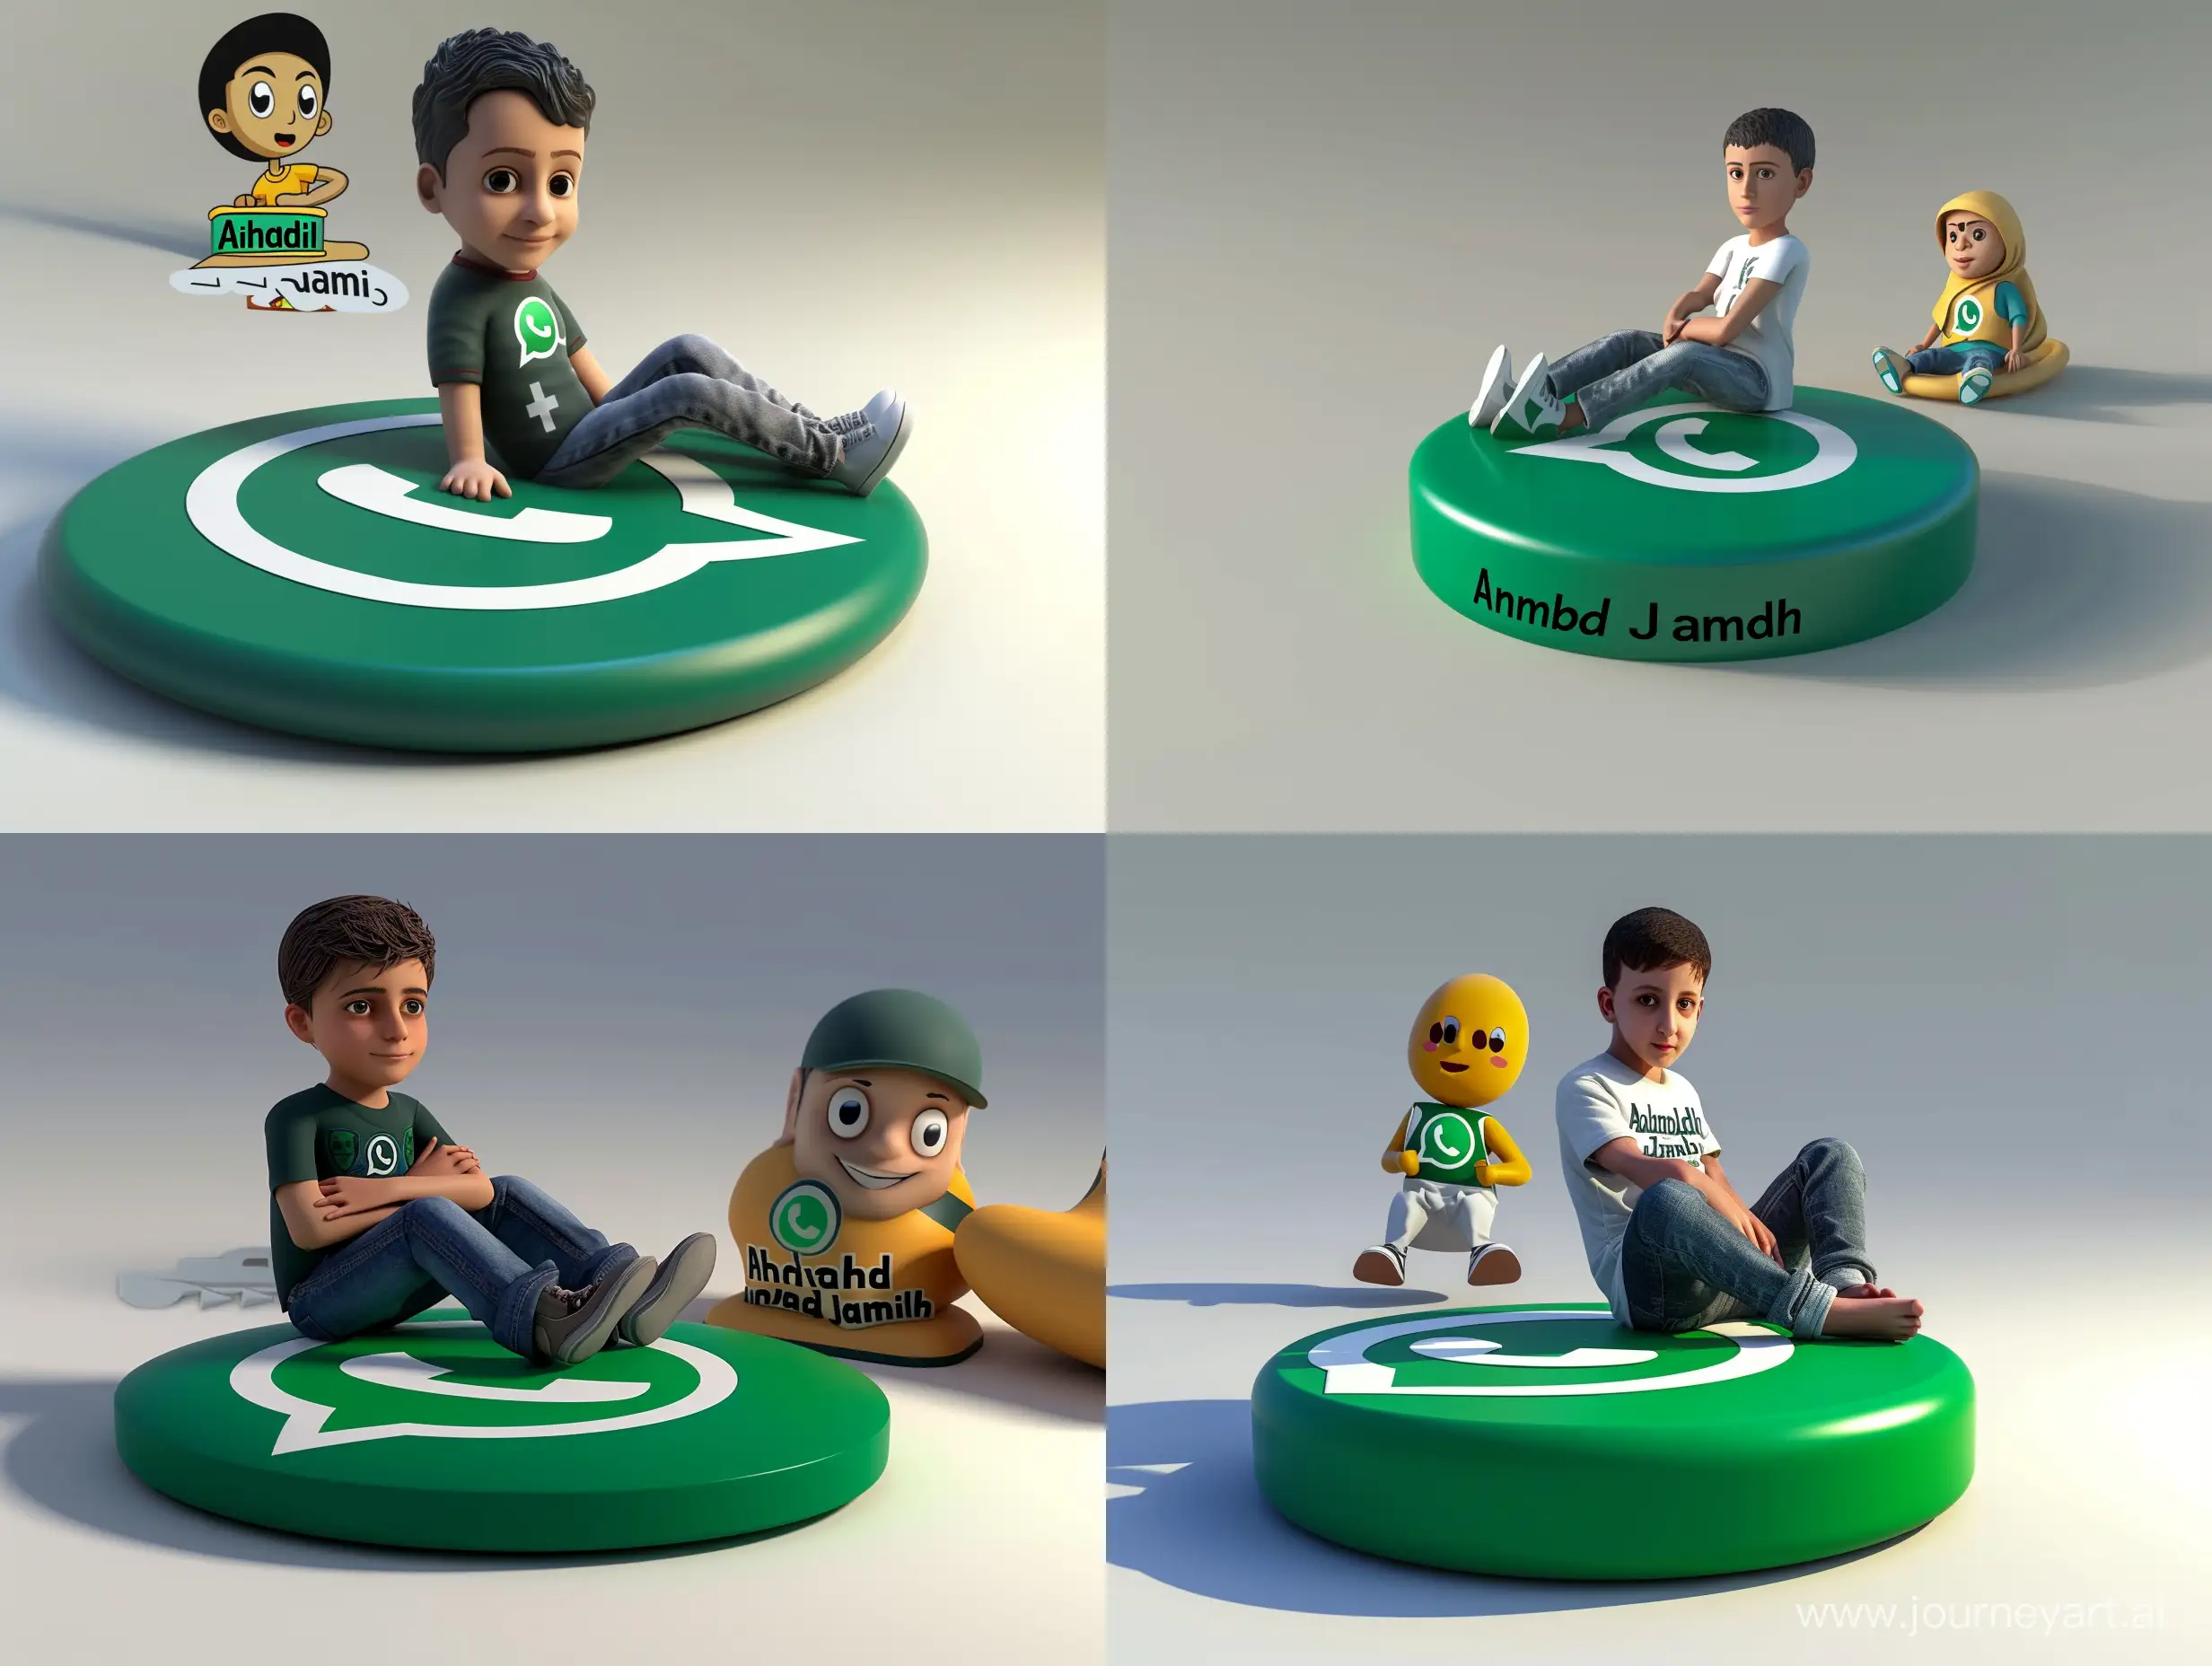 A 3d render young boy is sitting on a WhatsApp logo with his legs crossed, He has a WhatsApp profile background and the word "Ahmad Jamil" his background WhatsApp profile. The image also features a cartoon version of him in the background, sitting next to the 3d model.